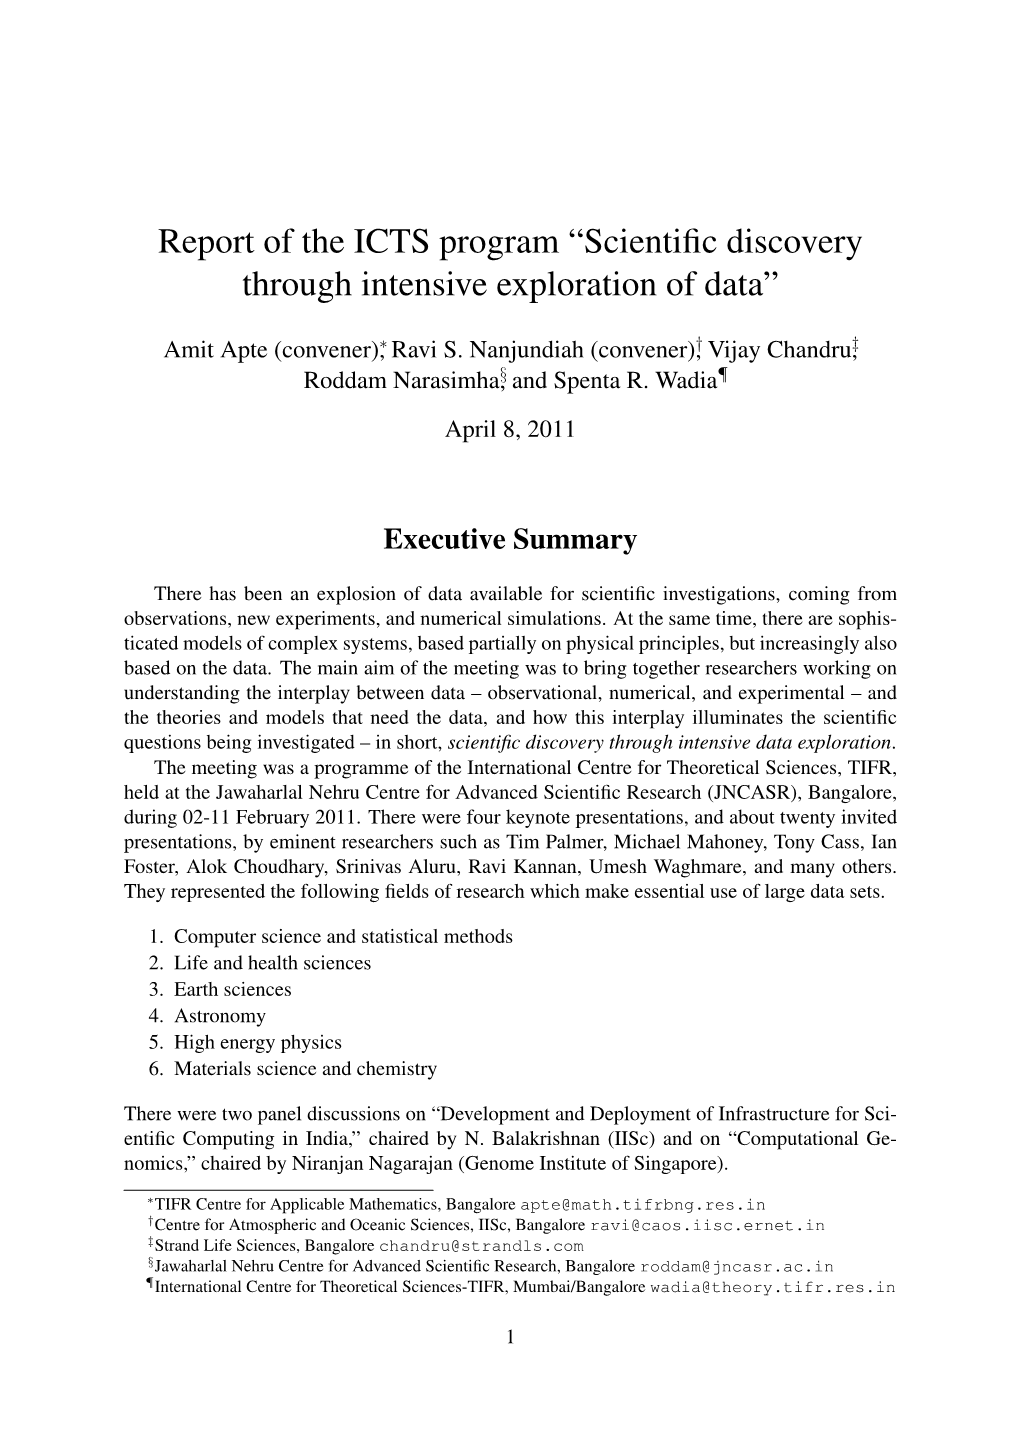 Report of the ICTS Program “Scientific Discovery Through Intensive Exploration of Data”